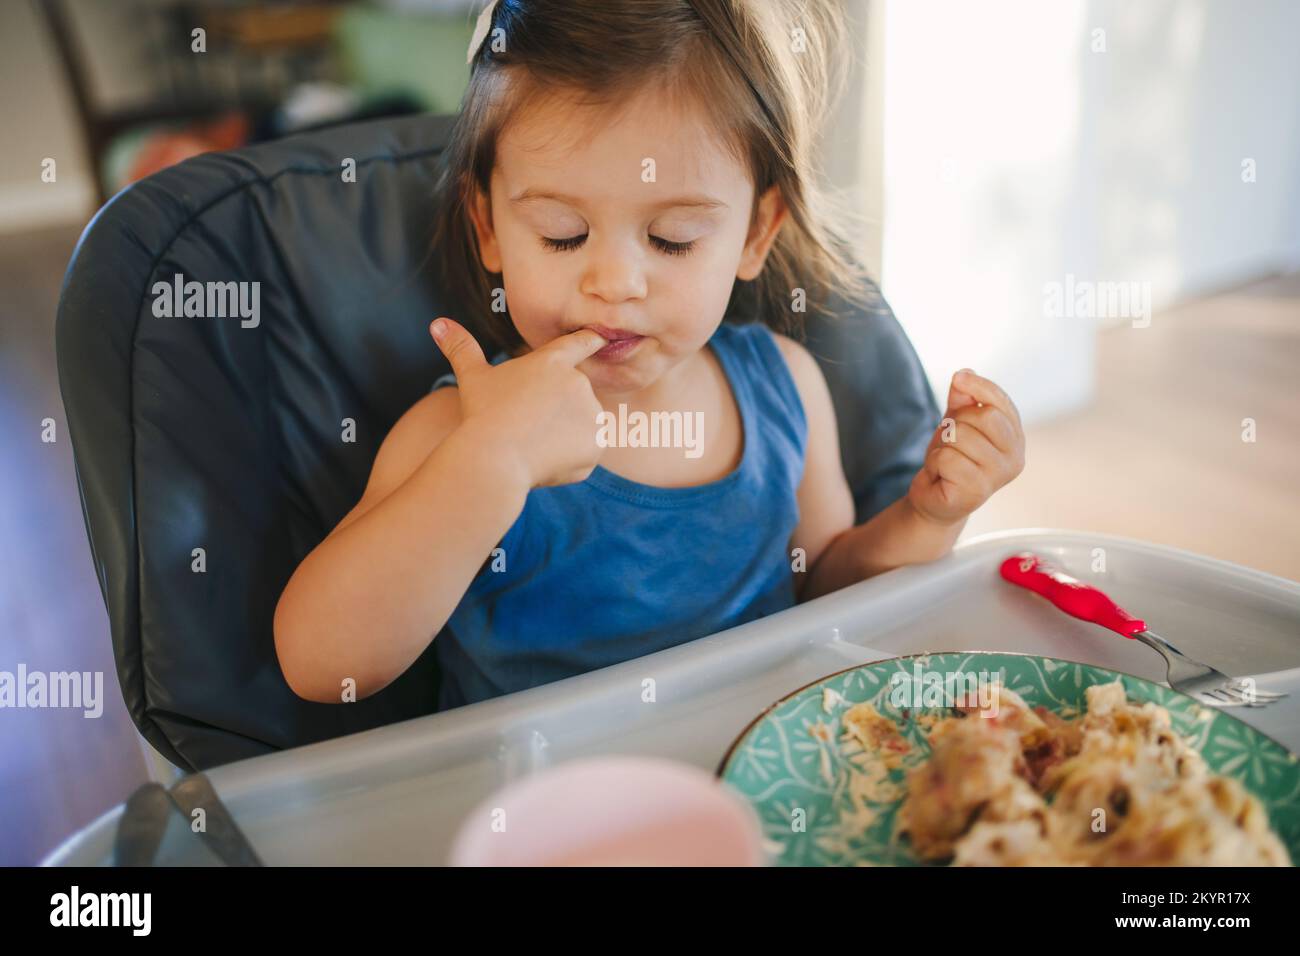 Adorable toddler baby girl sitting on high feeding chair eating homemade food at home. Children's closeup portrait. Healthy food. Healthy eating Stock Photo